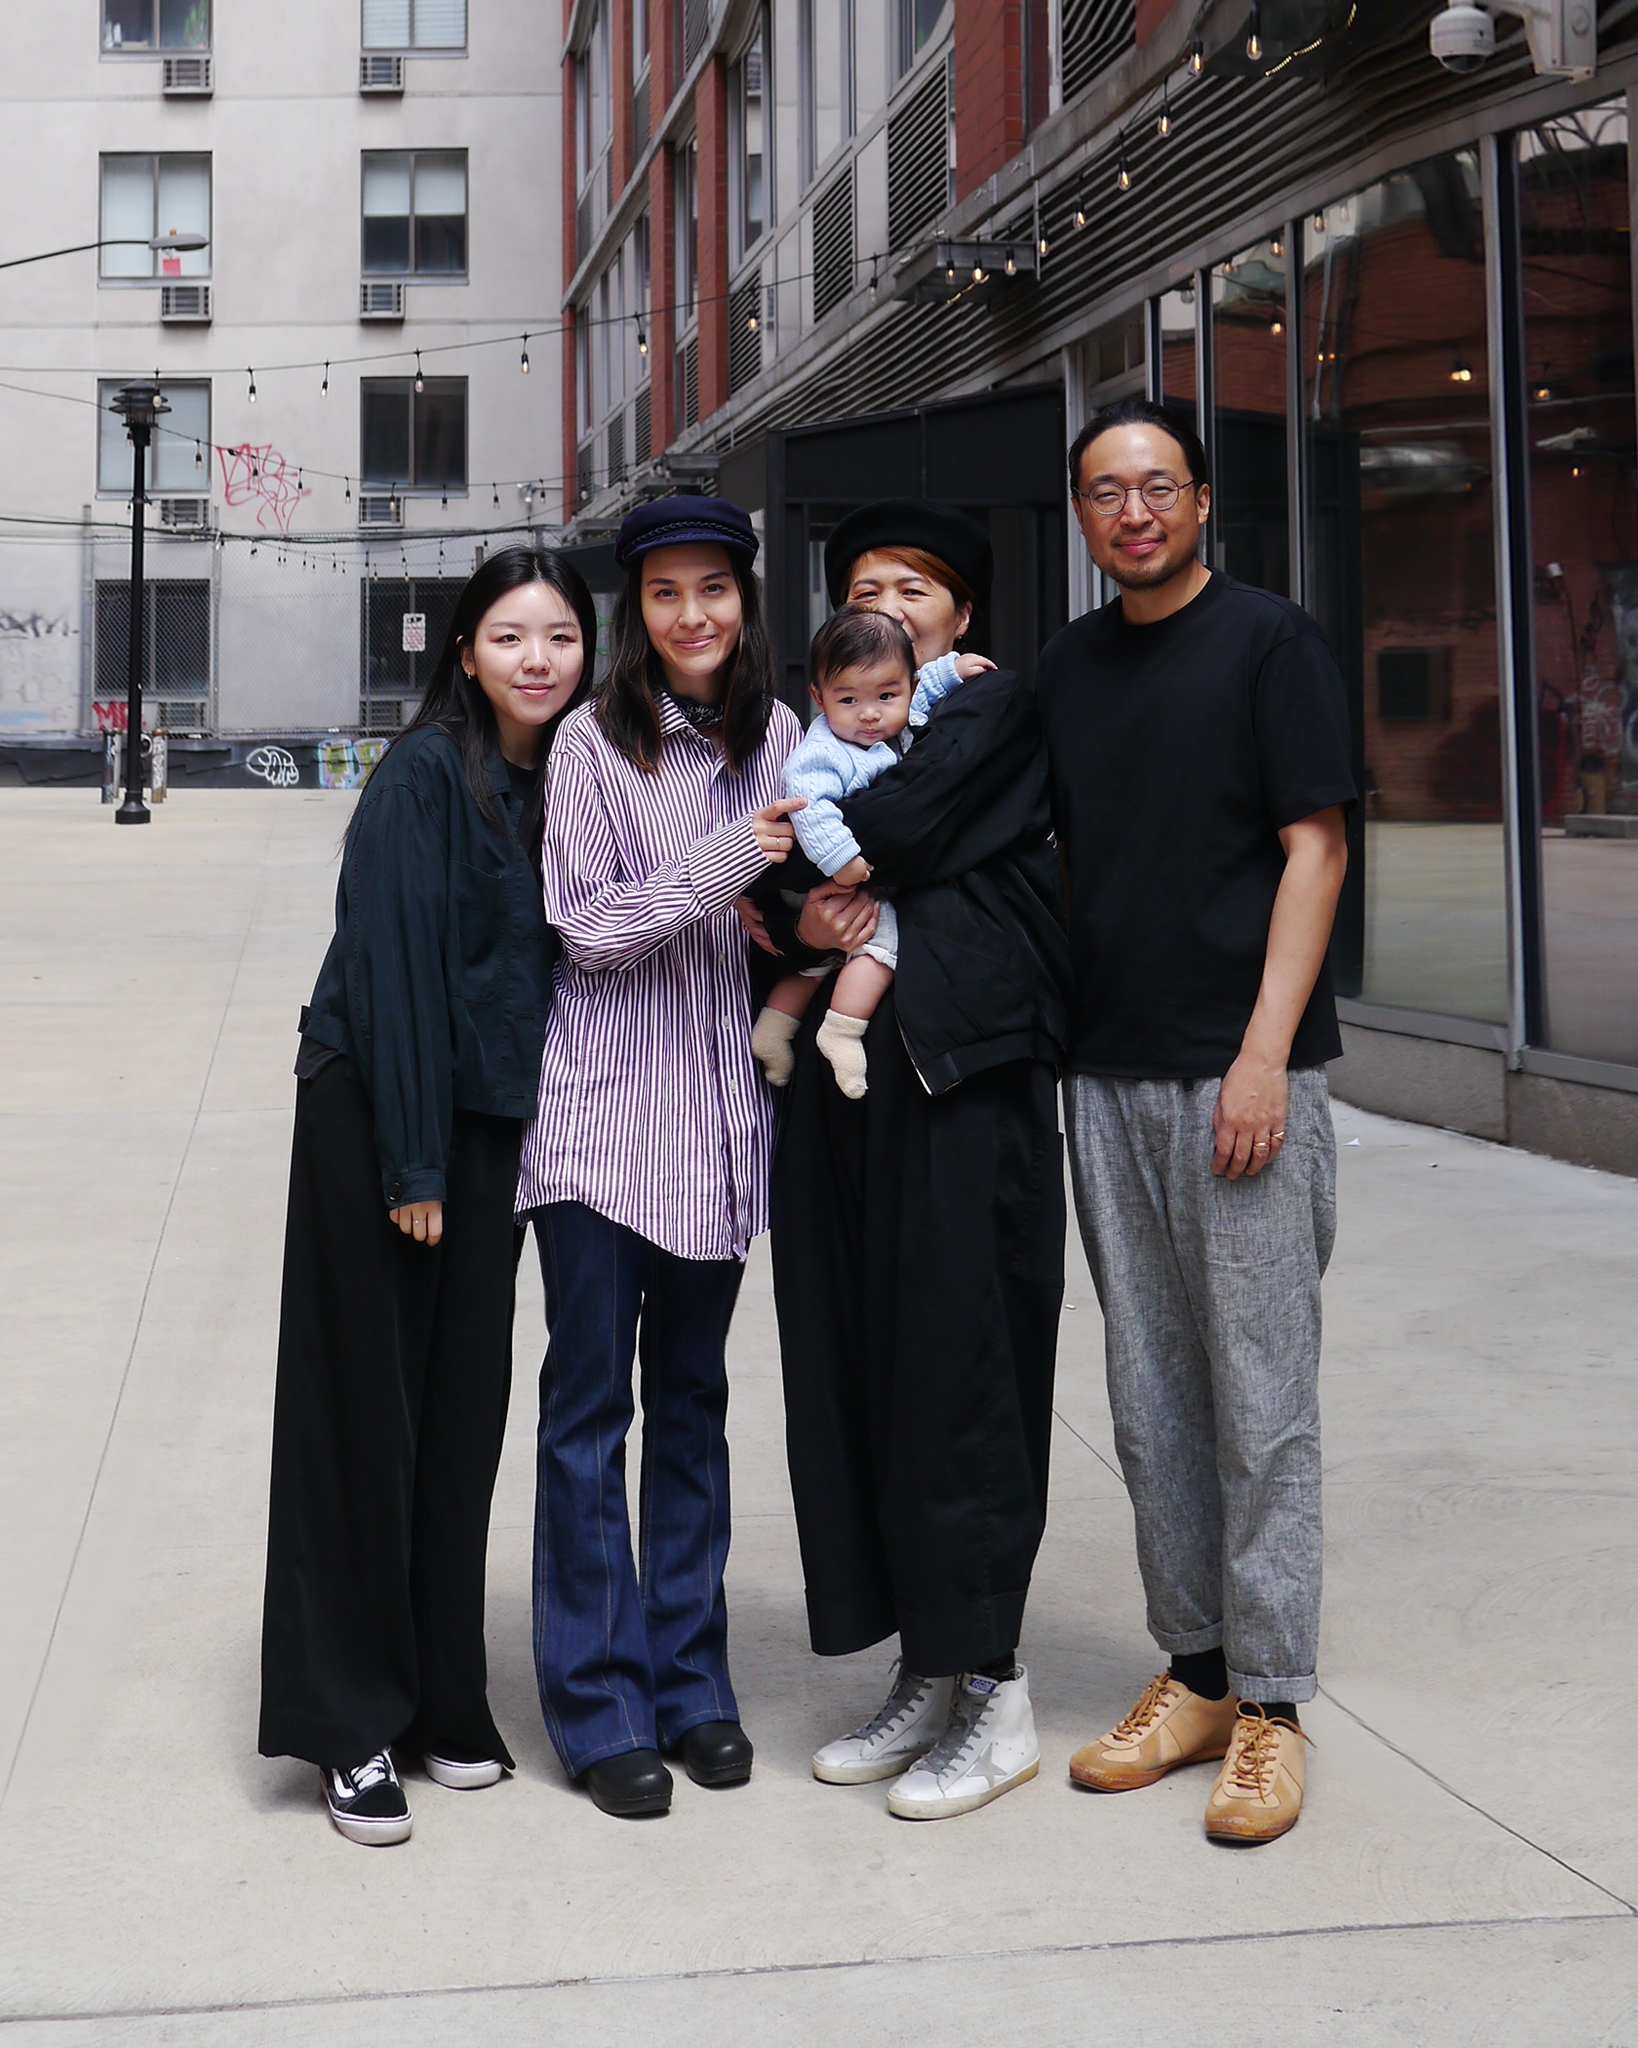 Nalata Nalata founders Angélique Chmielewski, Stevenson Aung and assistant manager Dani Sujin Lee, and baby in the Extra Place alley